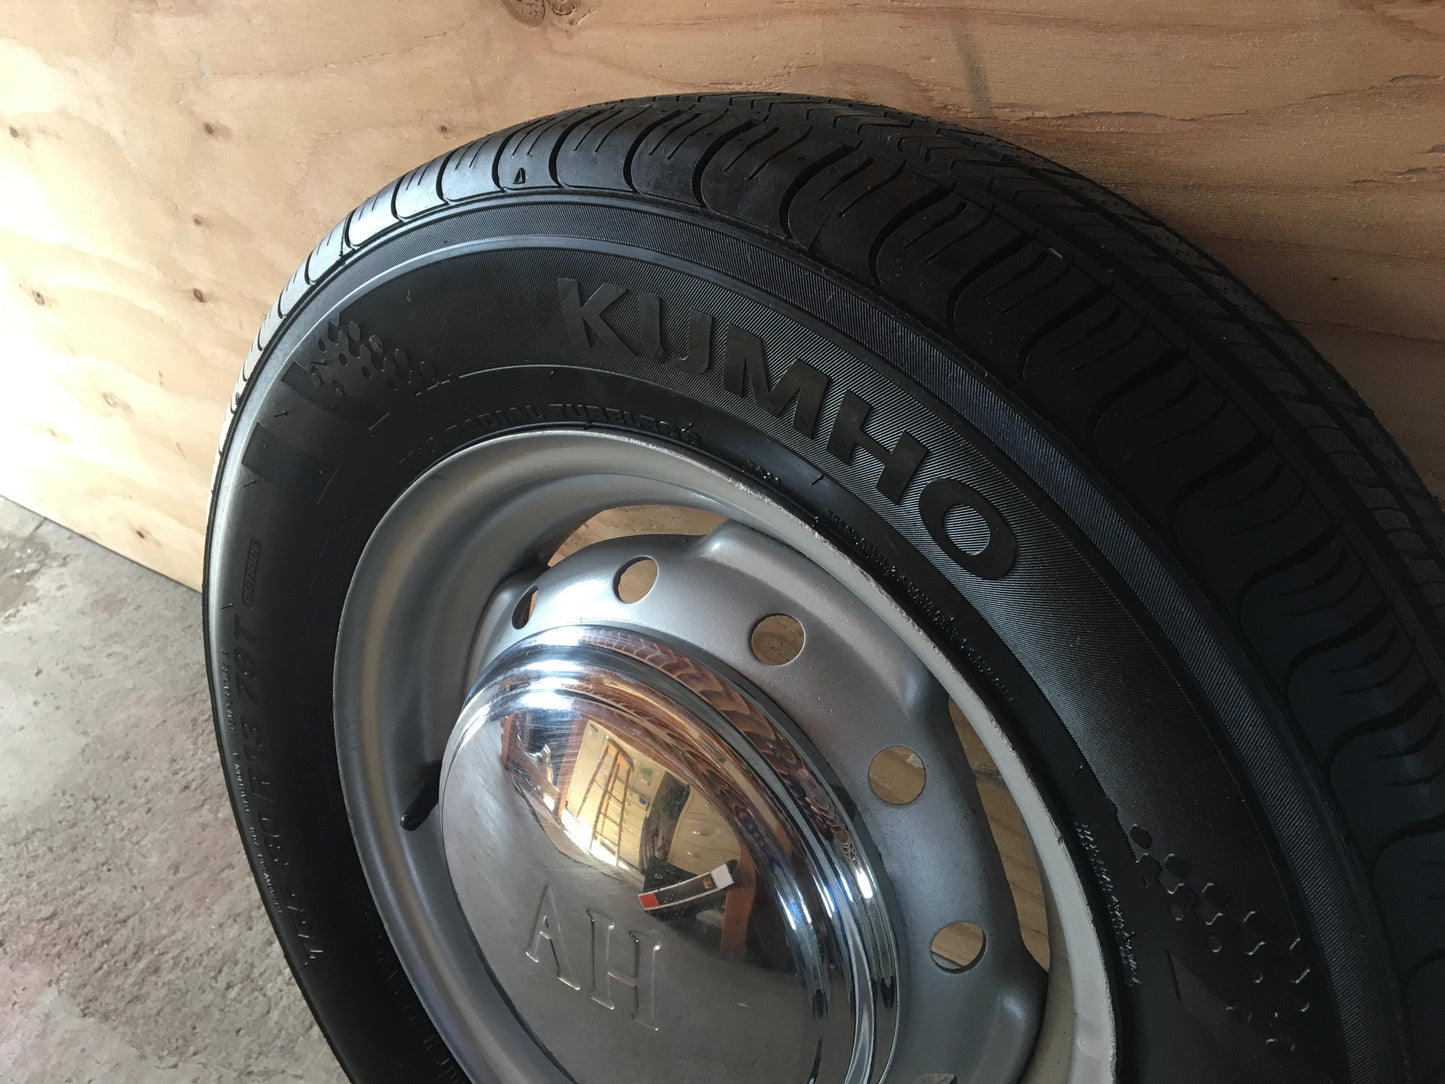 Austin Healey Sprite Sprite radial tire set that look stock but offers superior ride, braking and handling Exterior - Bugeye